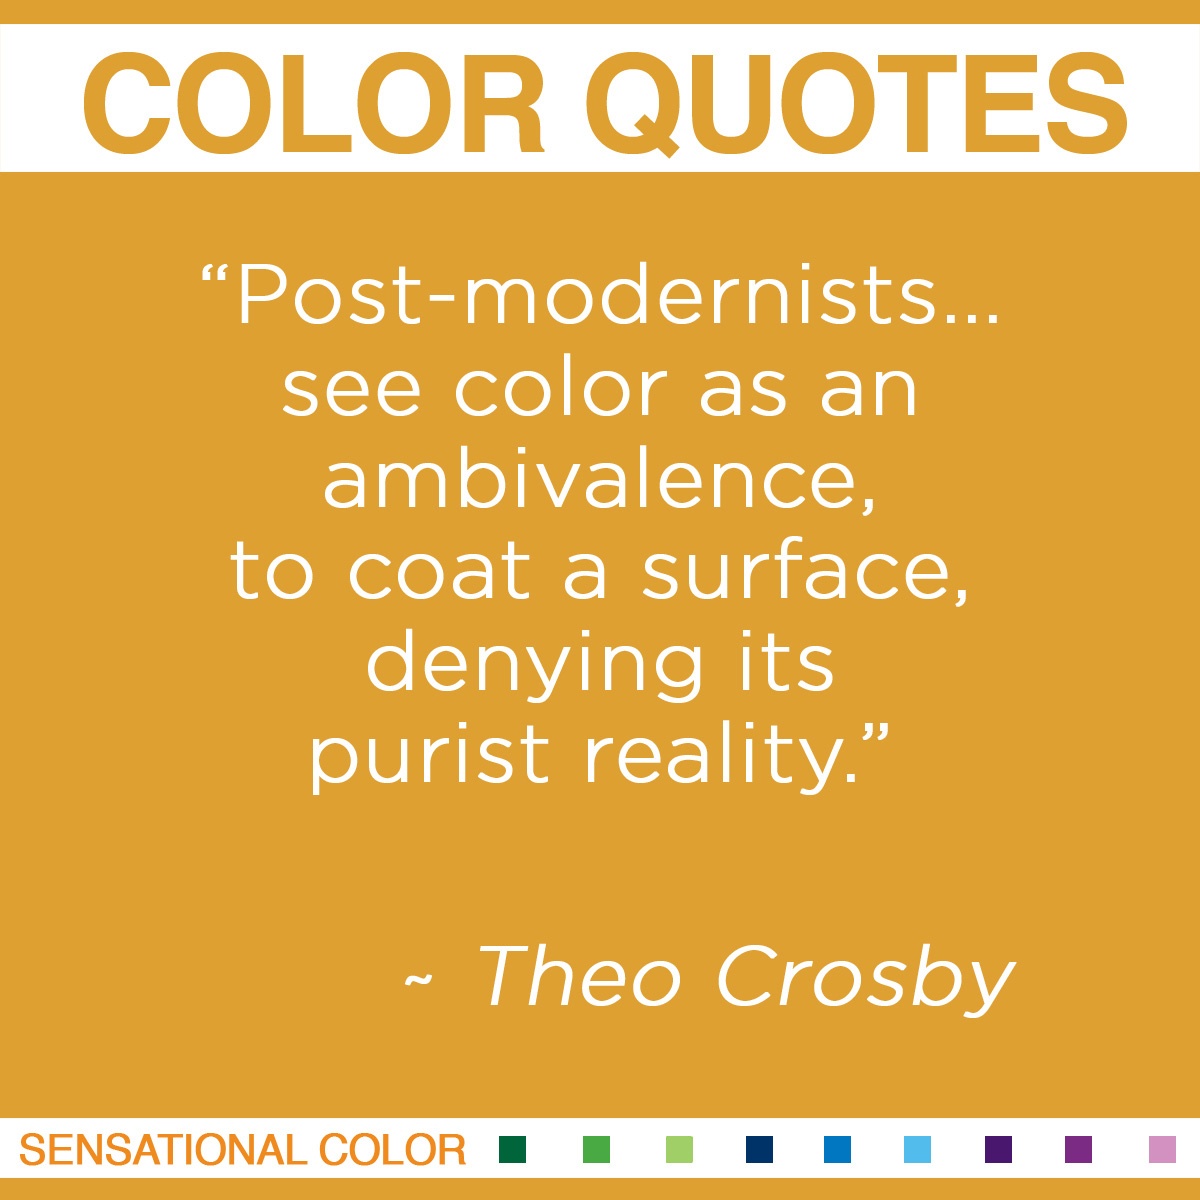 “Post-modernists… see color as an ambivalence, to coat a surface, denying its purist reality.” - Theo Crosby 